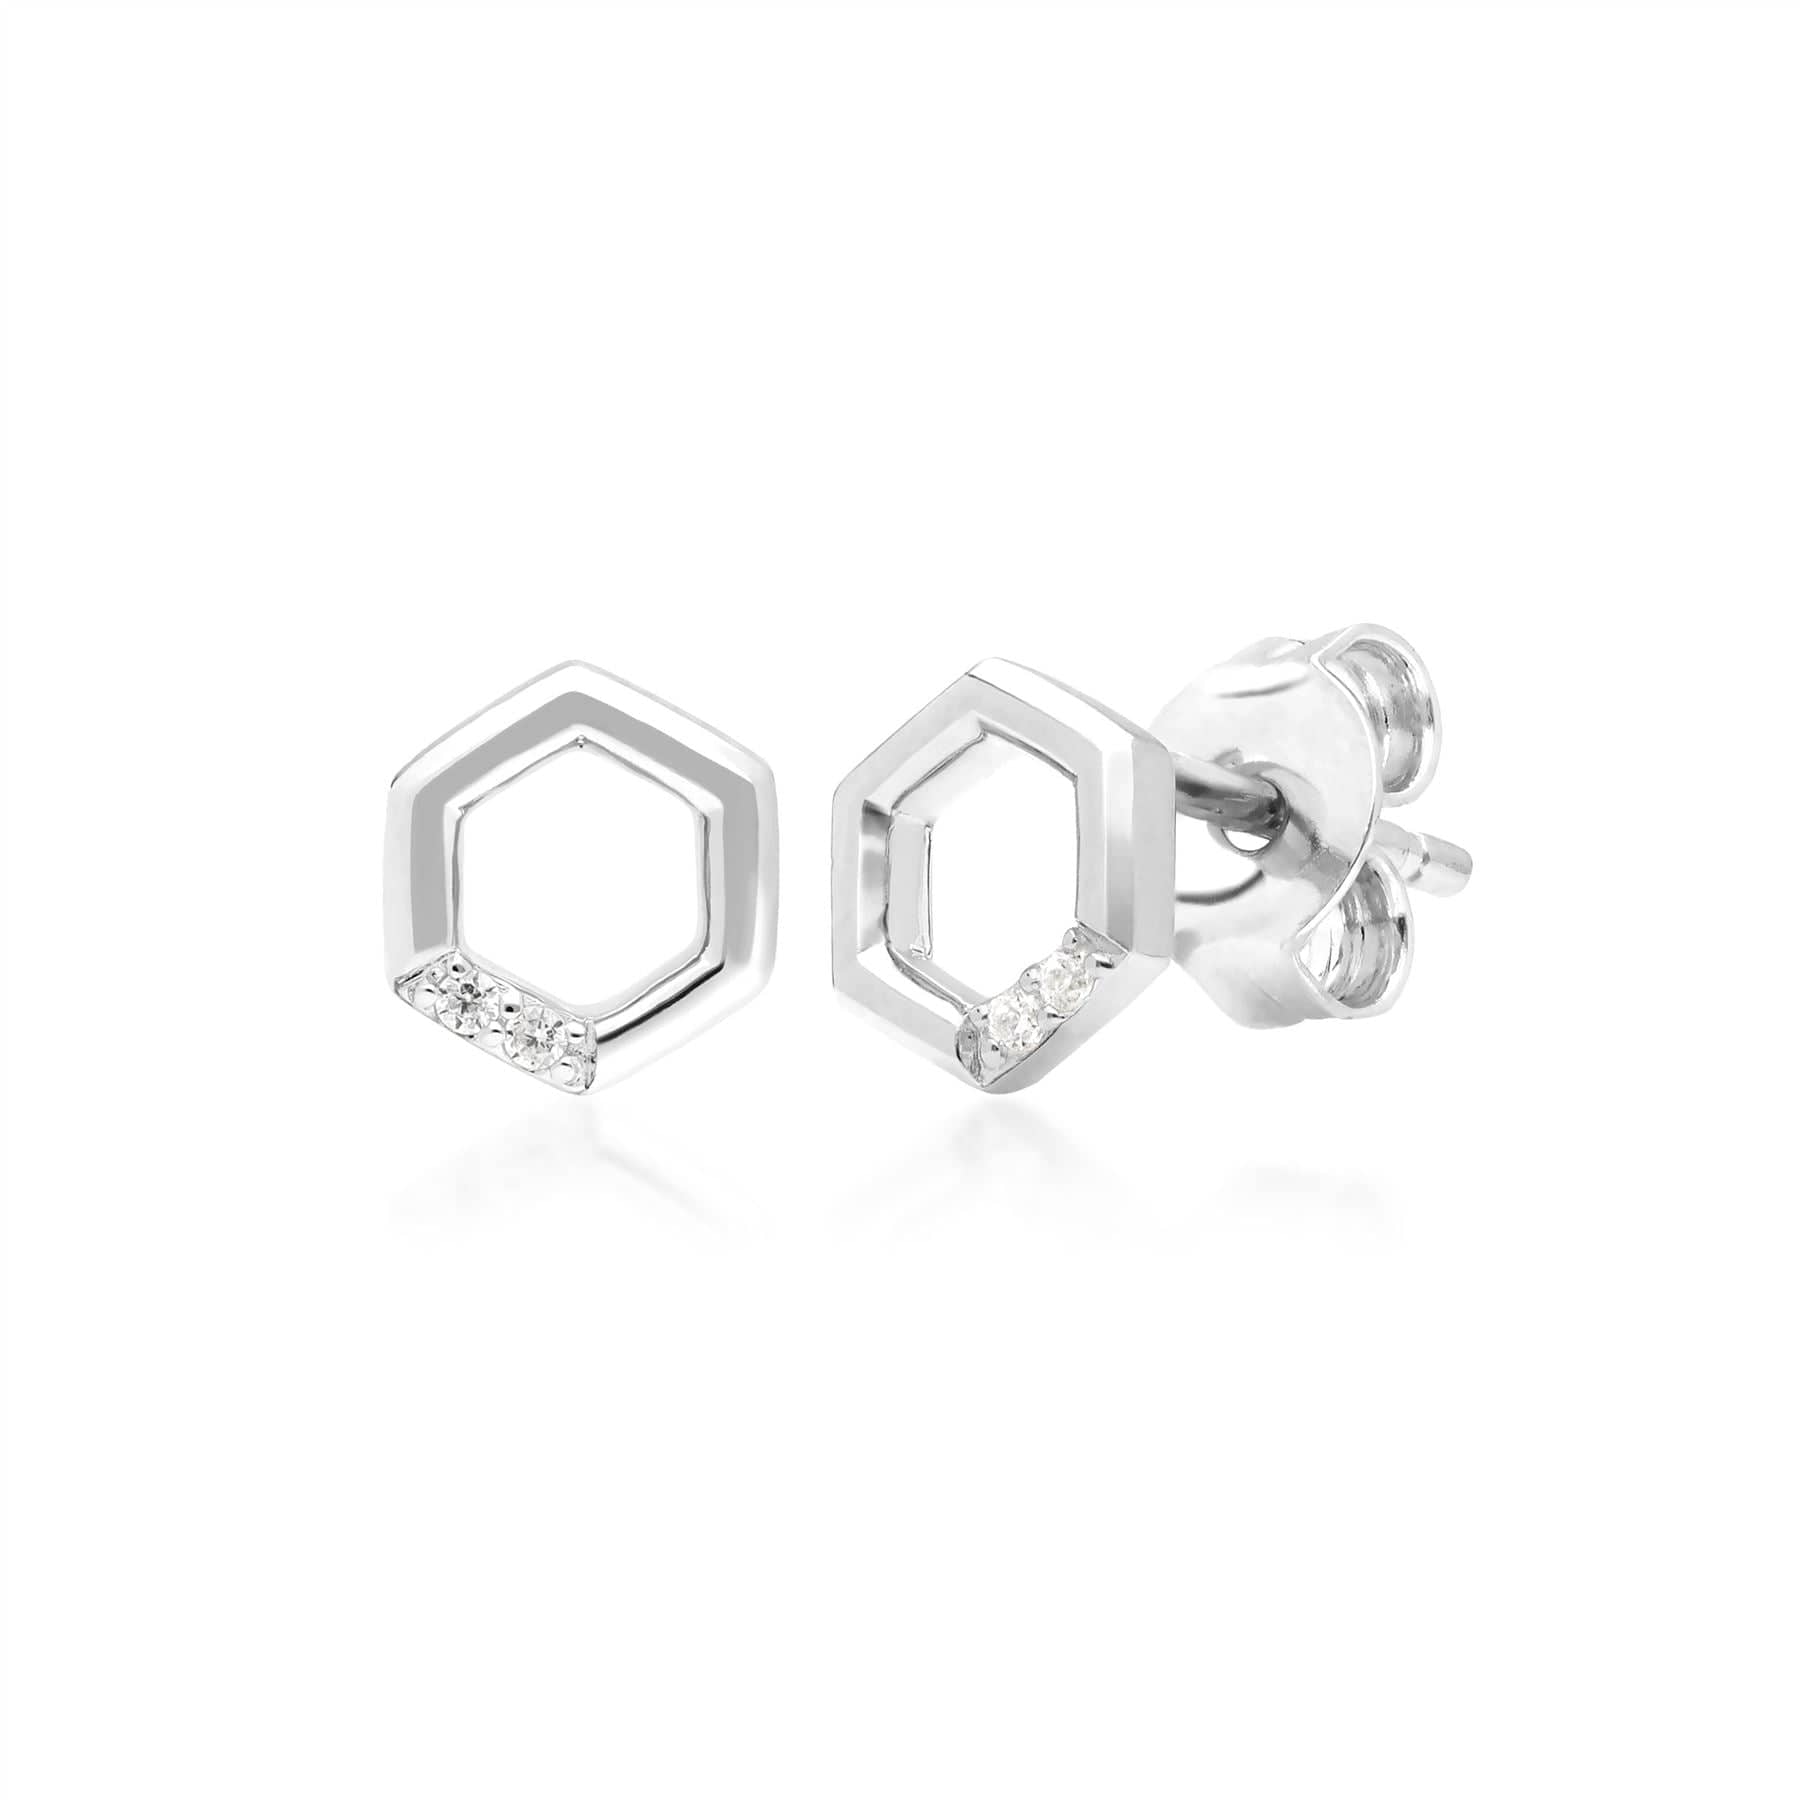 Image of Diamond Pave Hexagon Stud Earrings in 9ct White Gold